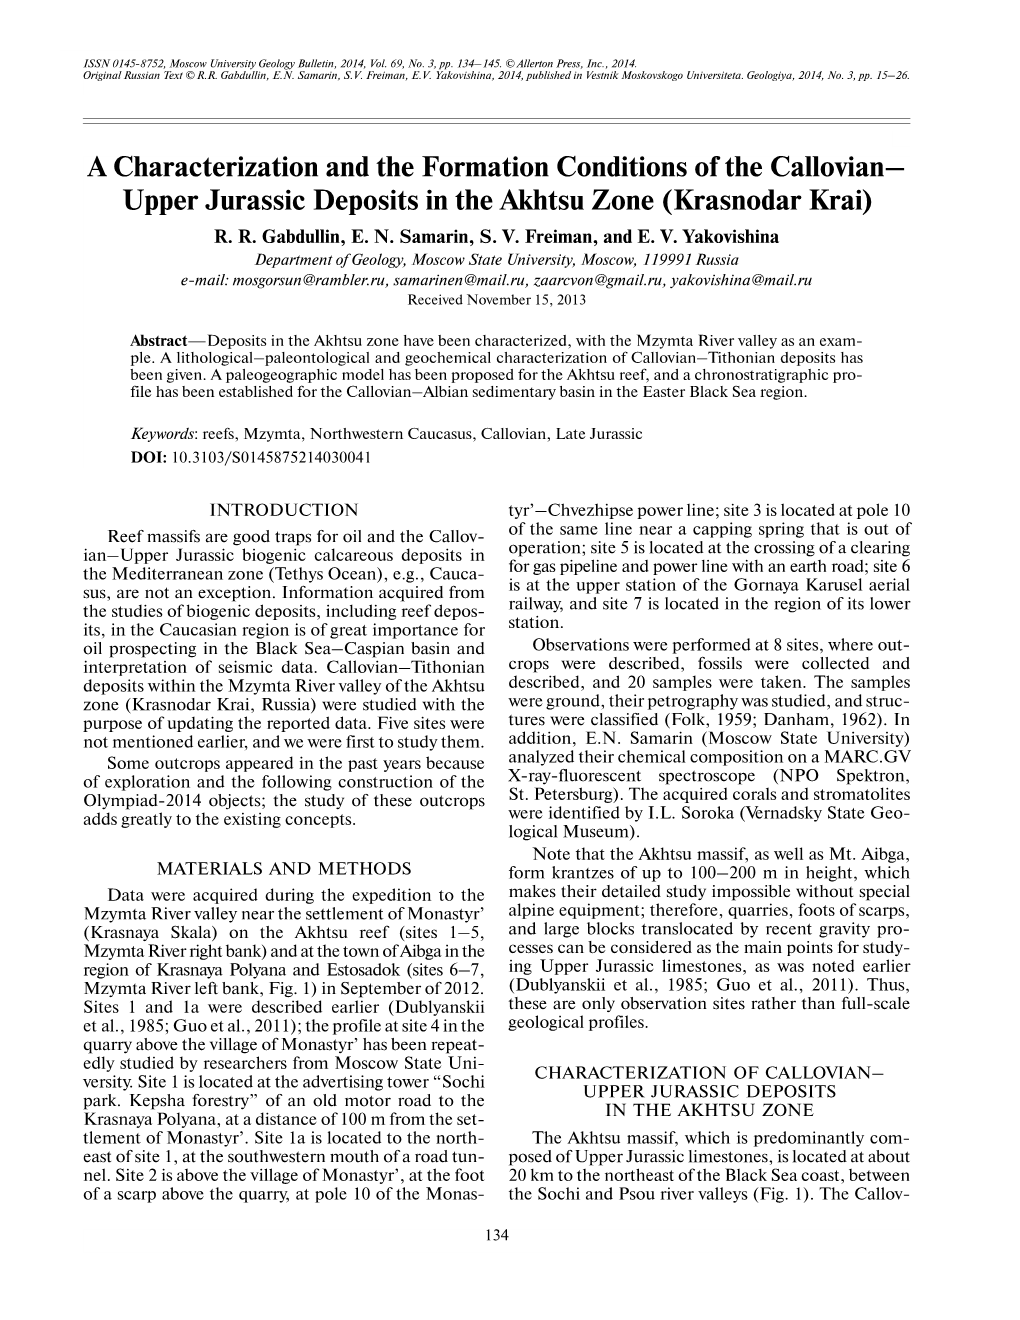 A Characterization and the Formation Conditions of the Callovian– Upper Jurassic Deposits in the Akhtsu Zone (Krasnodar Krai) R